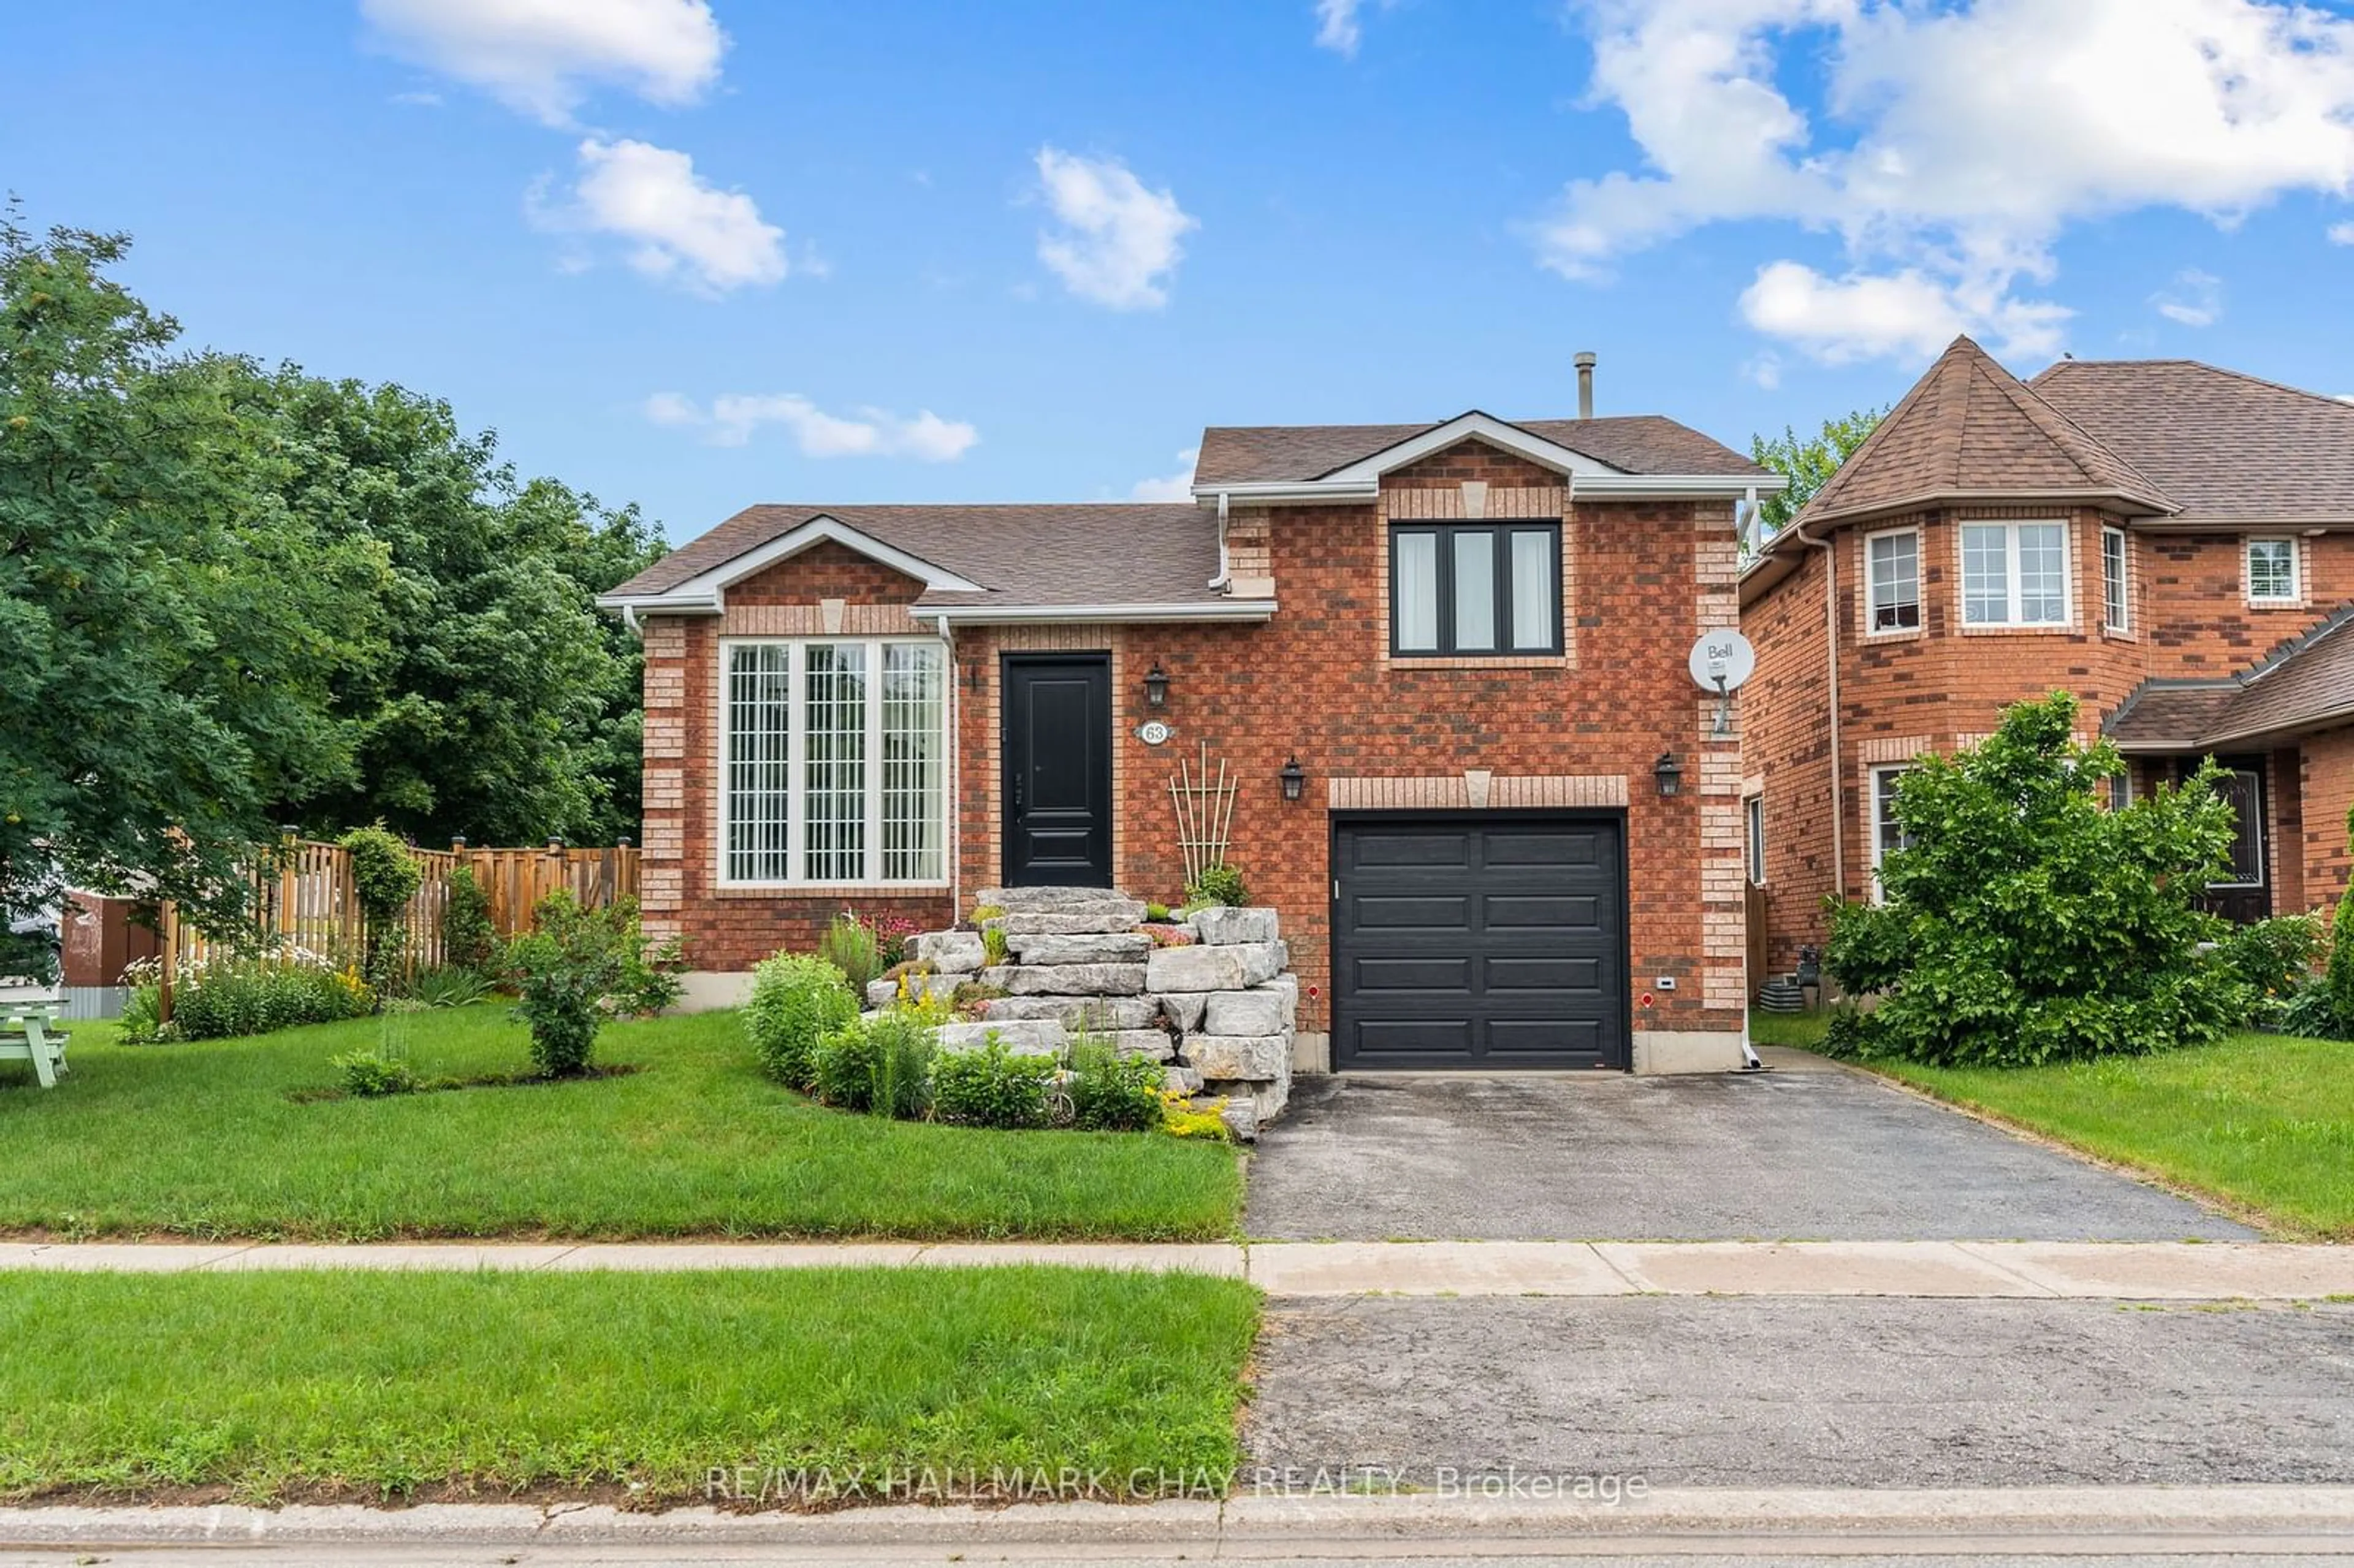 Home with brick exterior material for 63 Hersey Cres, Barrie Ontario L4N 8R2